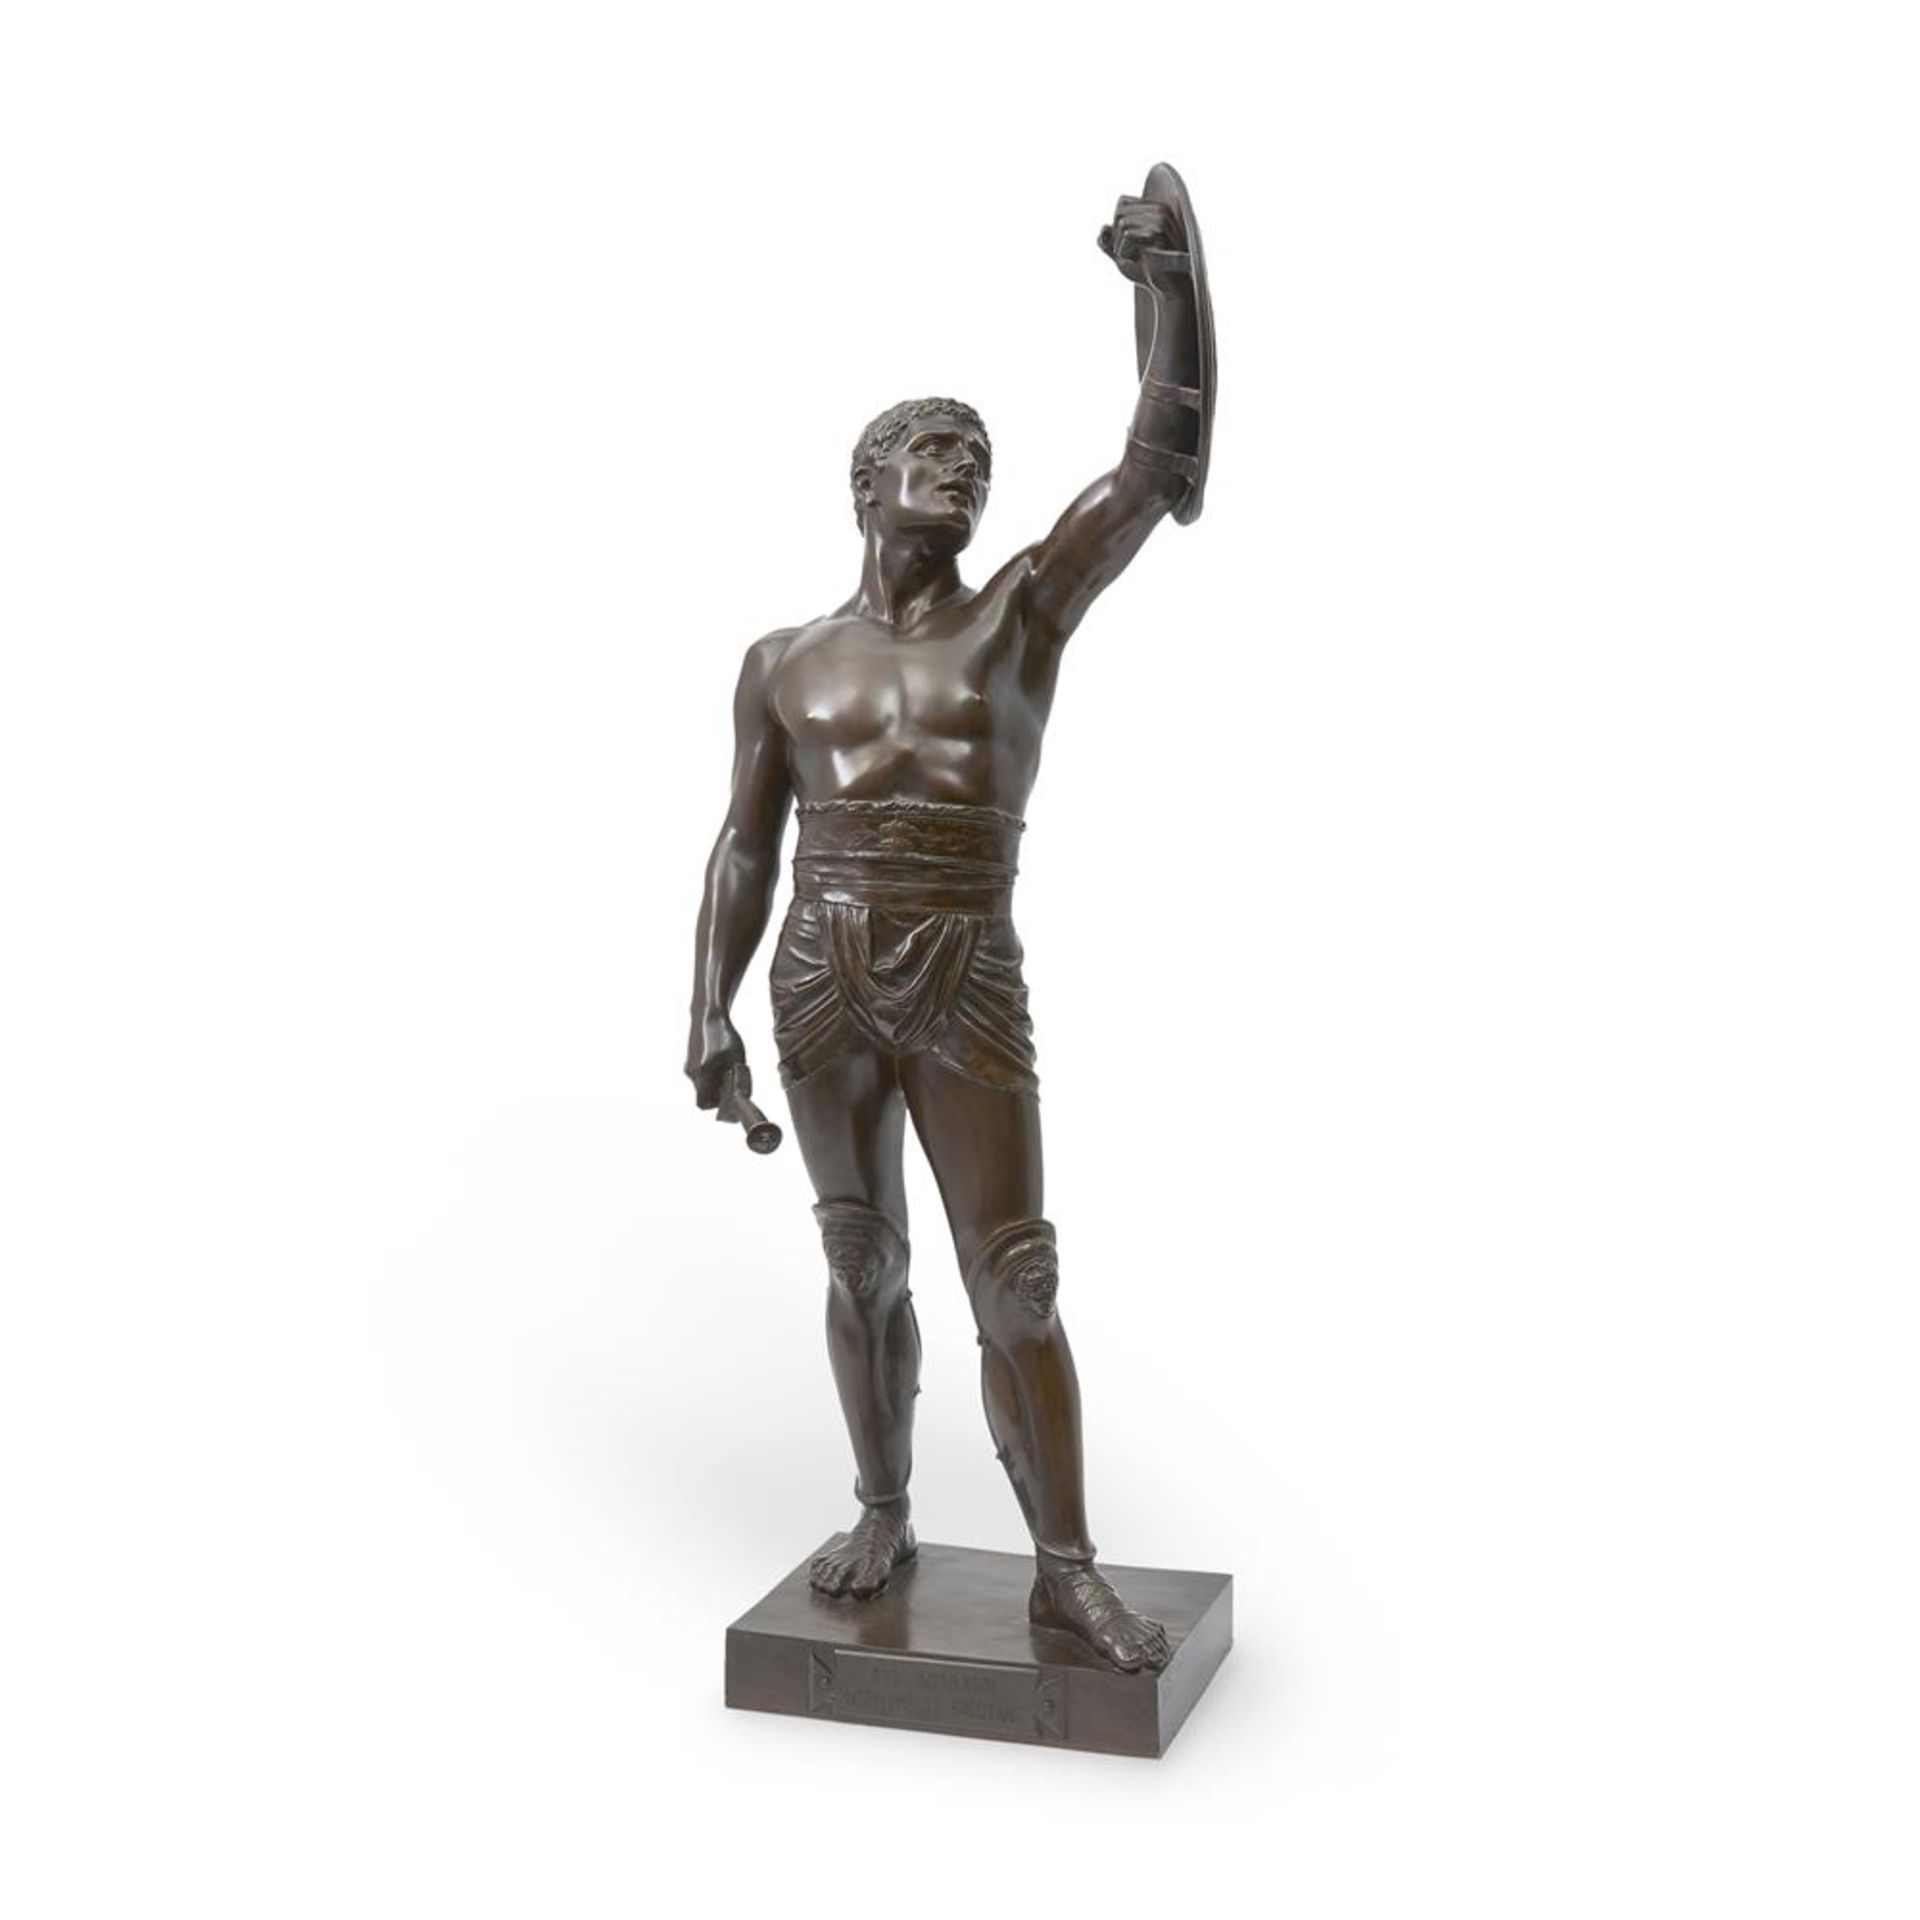 ÉMILE-CORIOLAN-HIPPOLYTE GUILLEMIN (FRENCH, 1841-1907), A BRONZE FIGURE OF A GLADIATOR